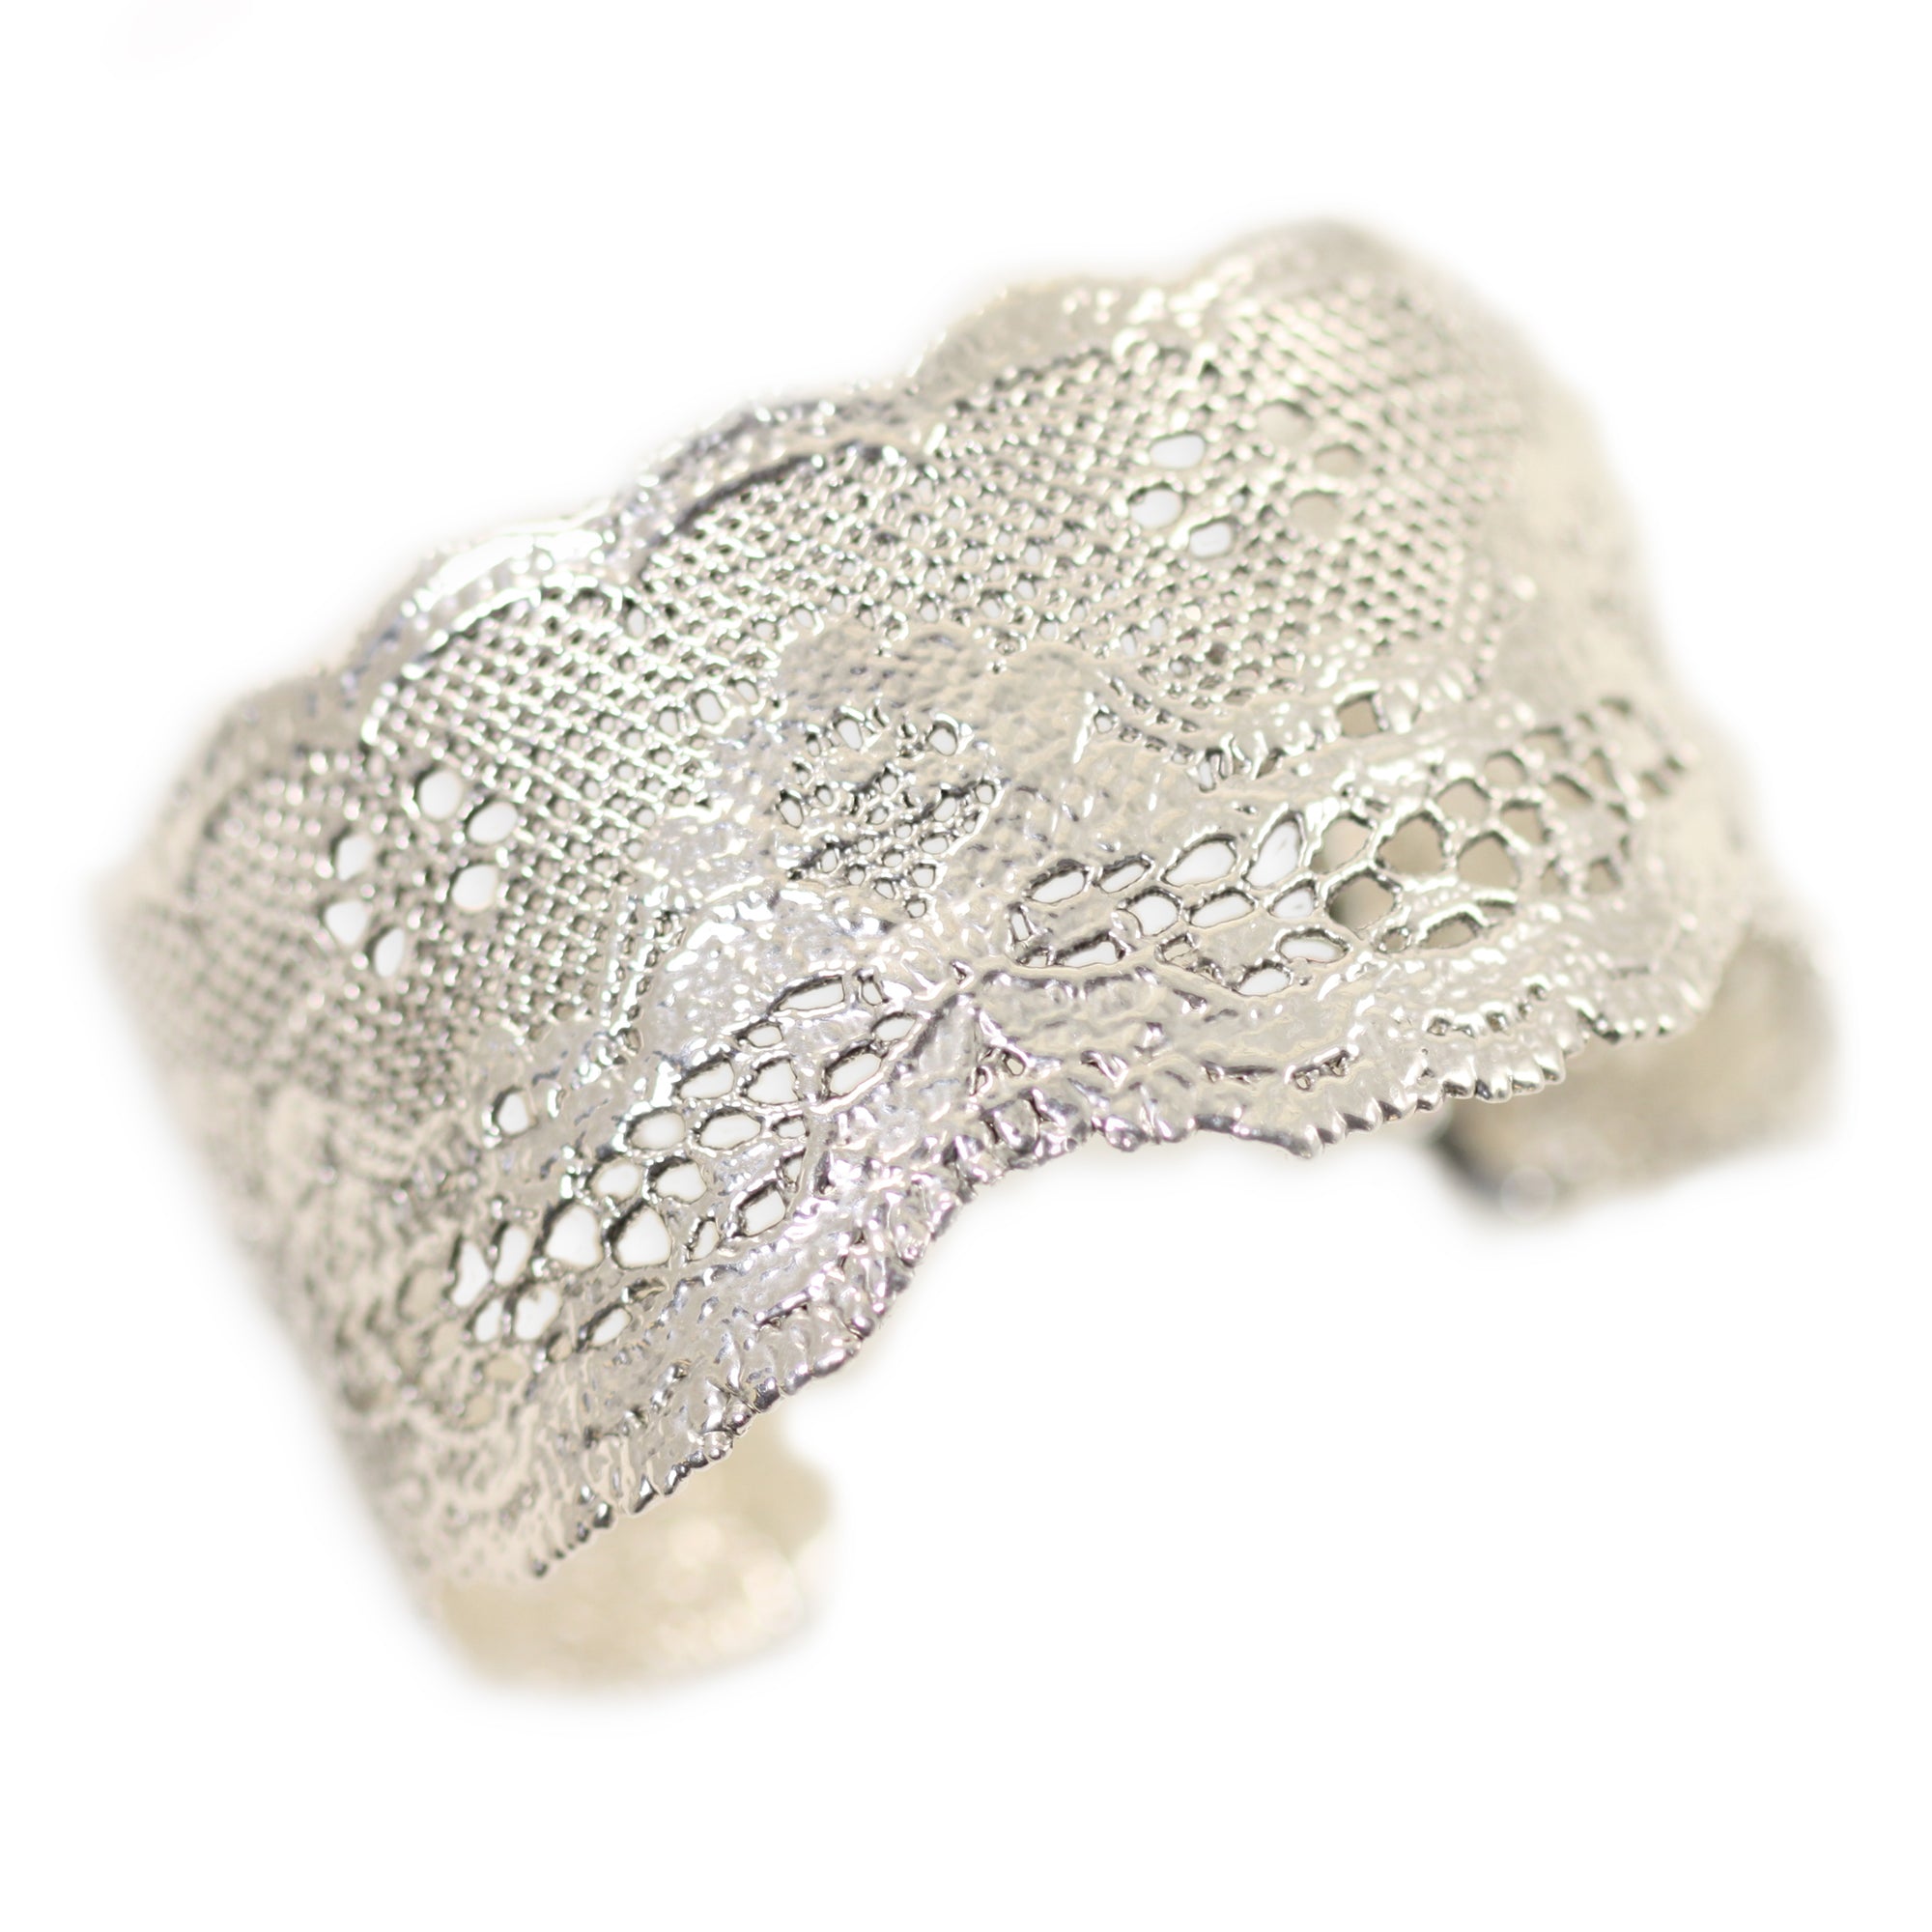 Rare double scalloped lace bracelet in sterling silver.